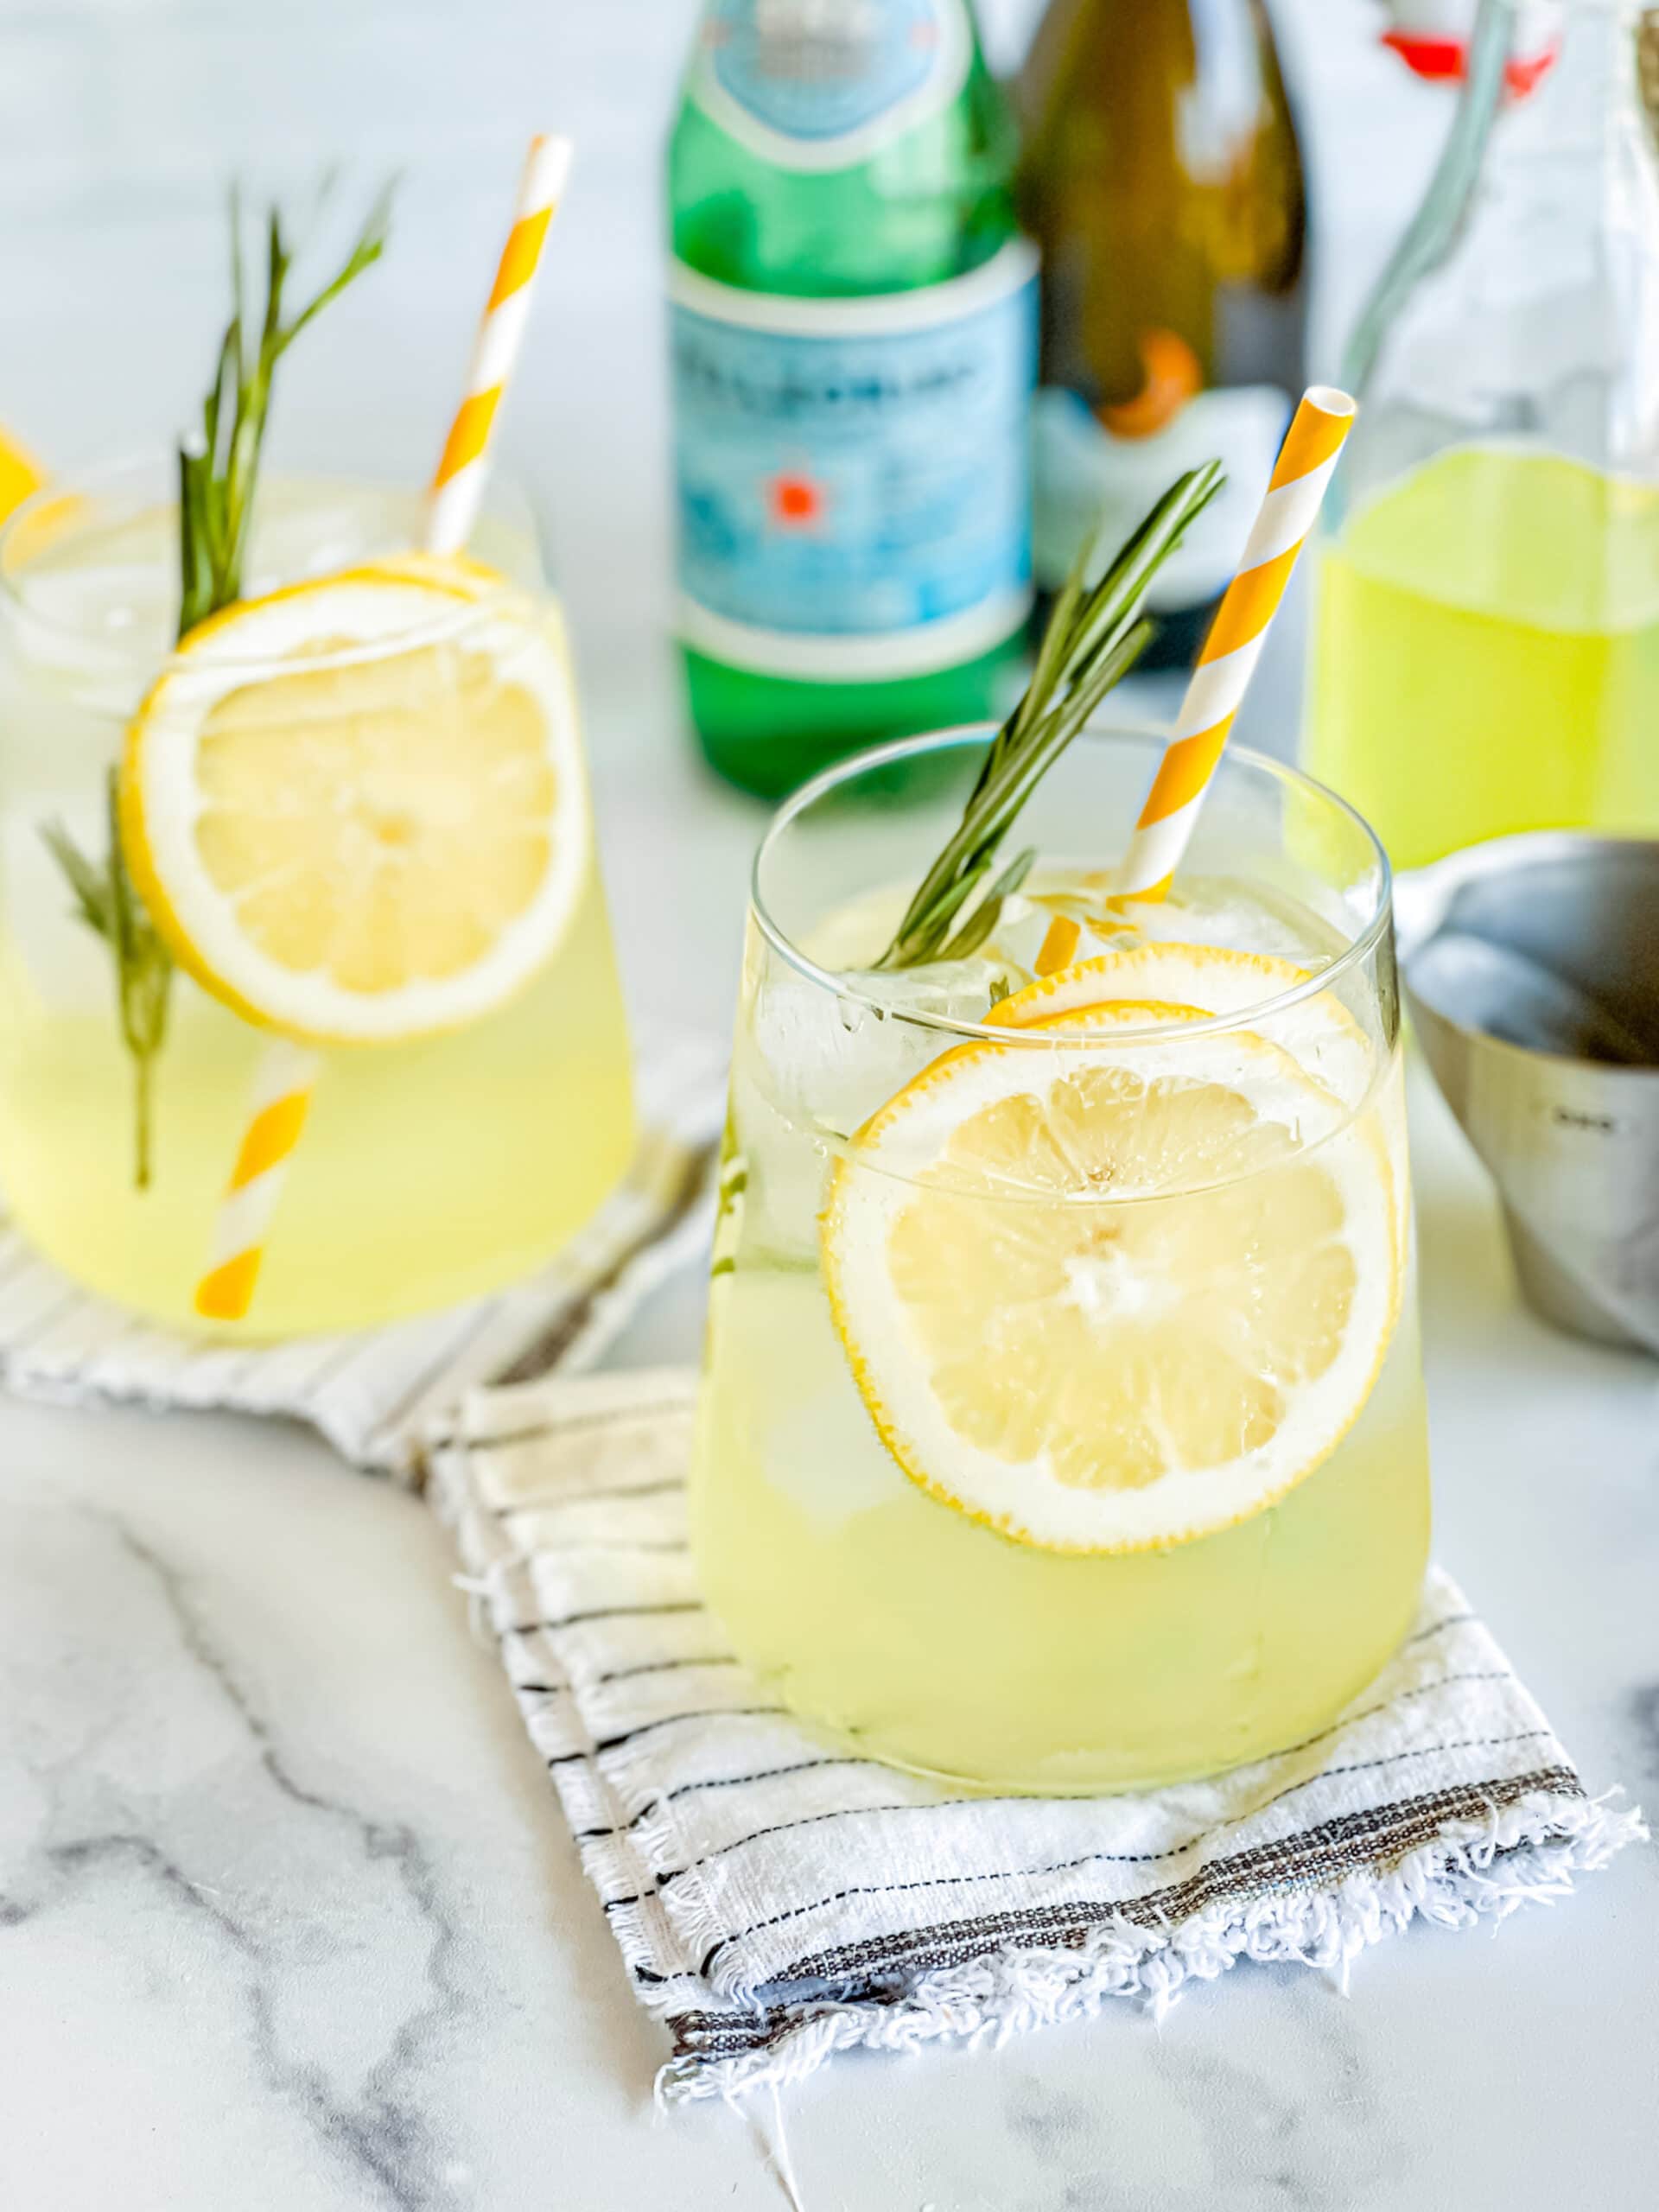 Two glasses of limoncello spritz, garnished with lemon, rosemary, and yellow striped straw. Sparkling water, Processo, and limoncello in the background.